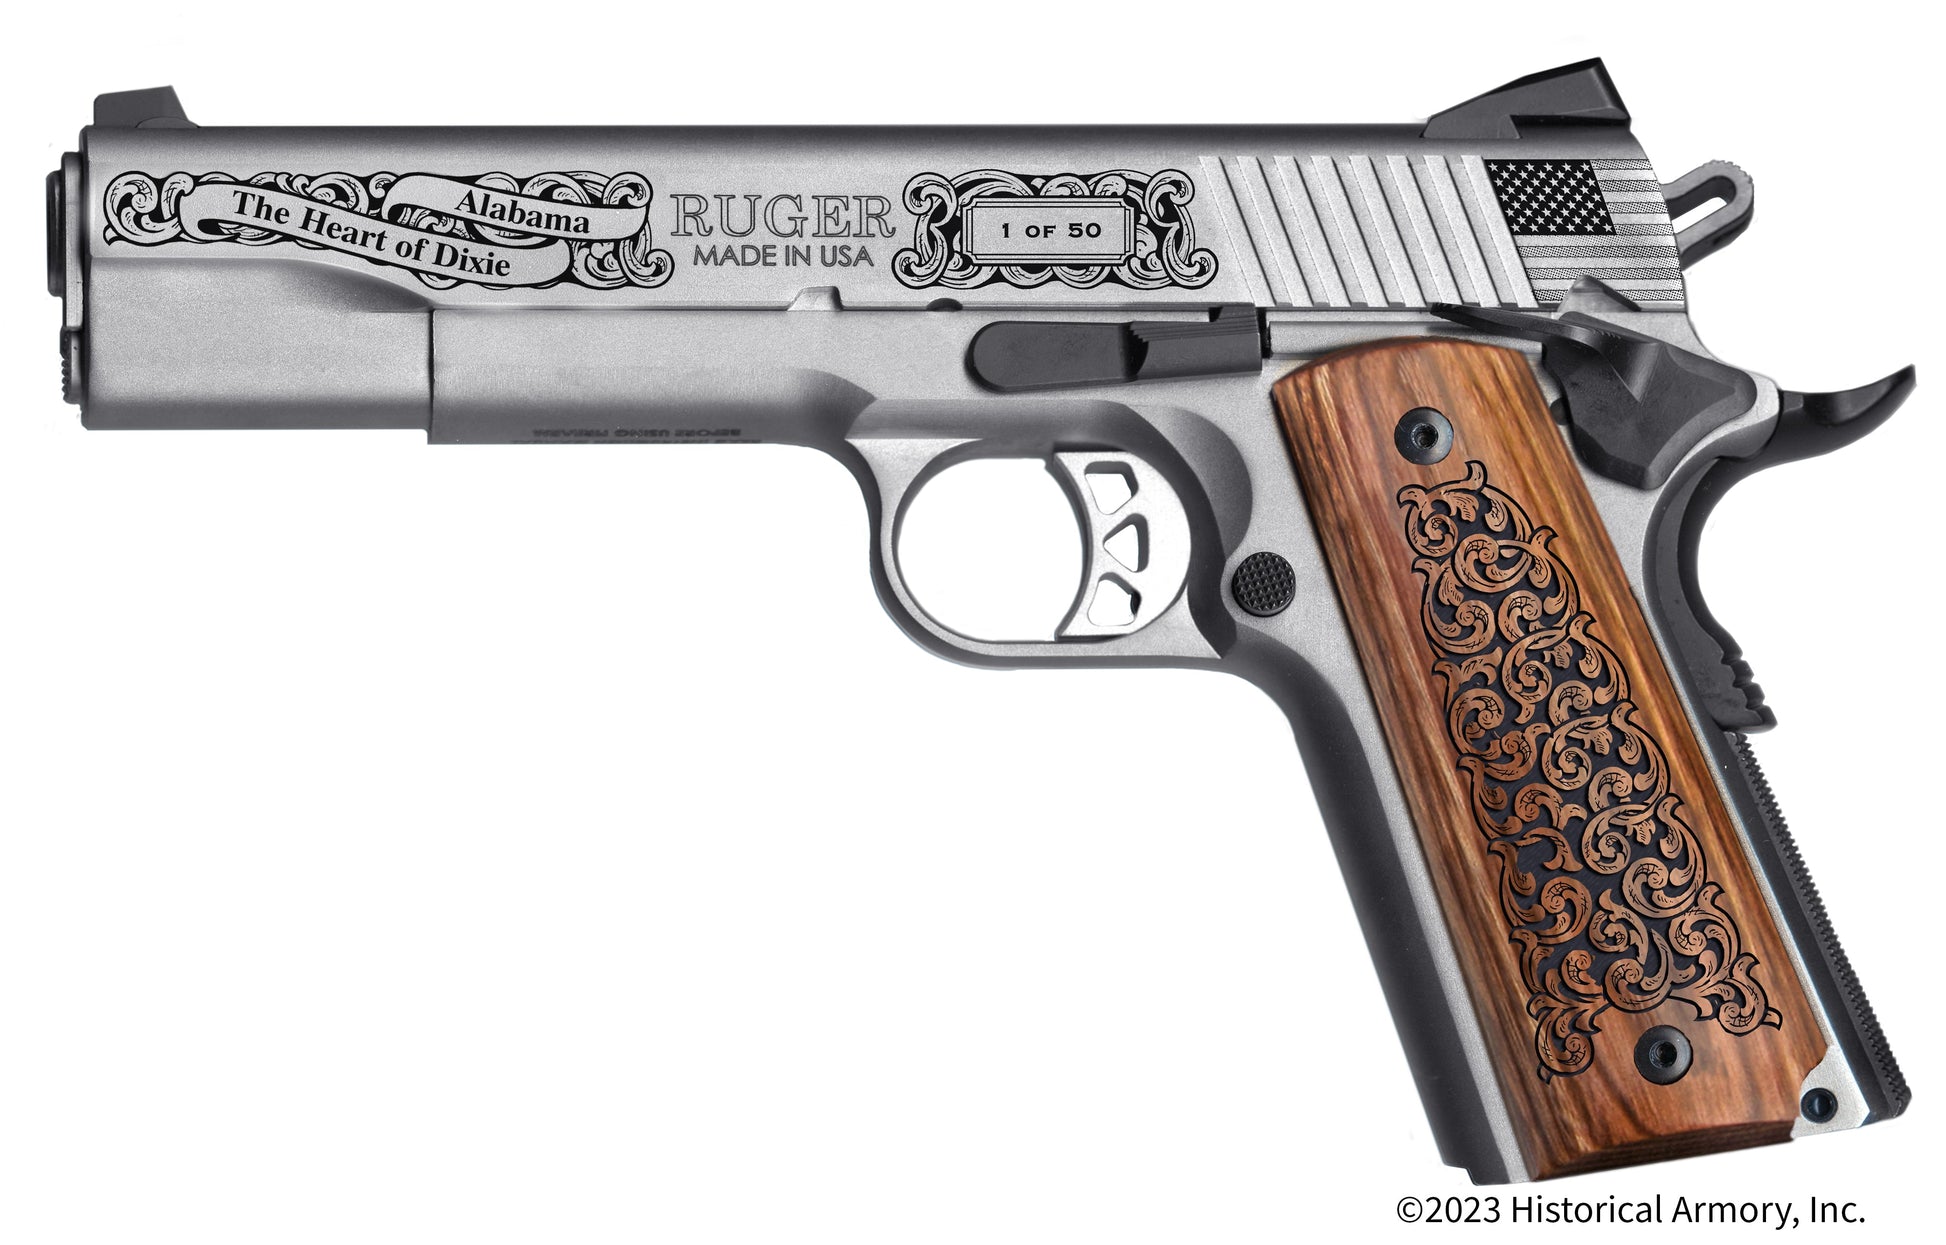 Cleburne  County Alabama Engraved .45 Auto Ruger 1911